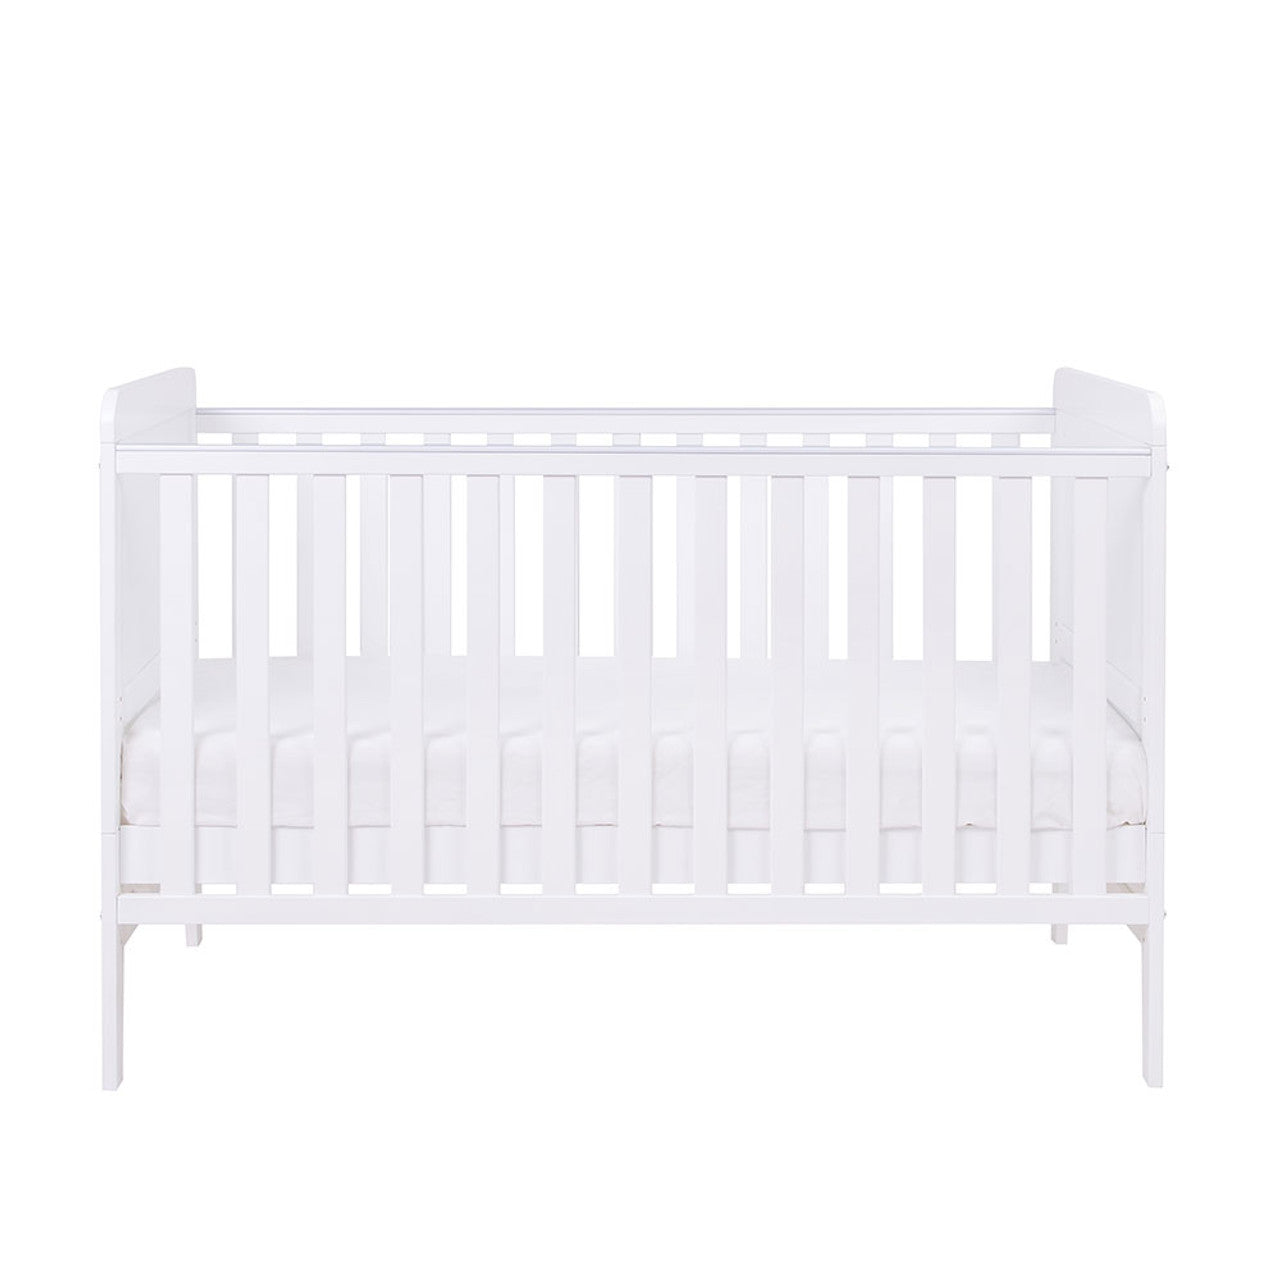 Tutti Bambini Rio 2 Piece Room Set - White -  | For Your Little One